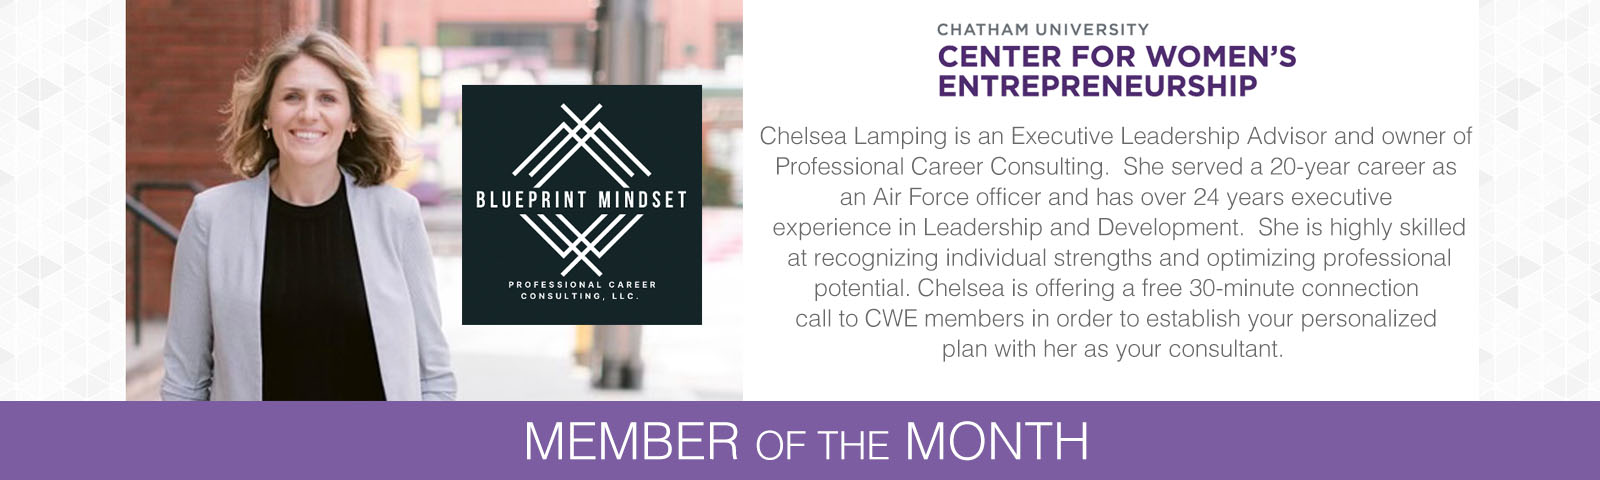 career as an Air Force officer and has over 24 years executive experience in Leadership and Development.  She is highly skilled at recognizing individual strengths and optimizing professional potential. Chelsea is offering a free 30-minute connection call to CWE members in order to establish your personalized plan with her as your consultant. 